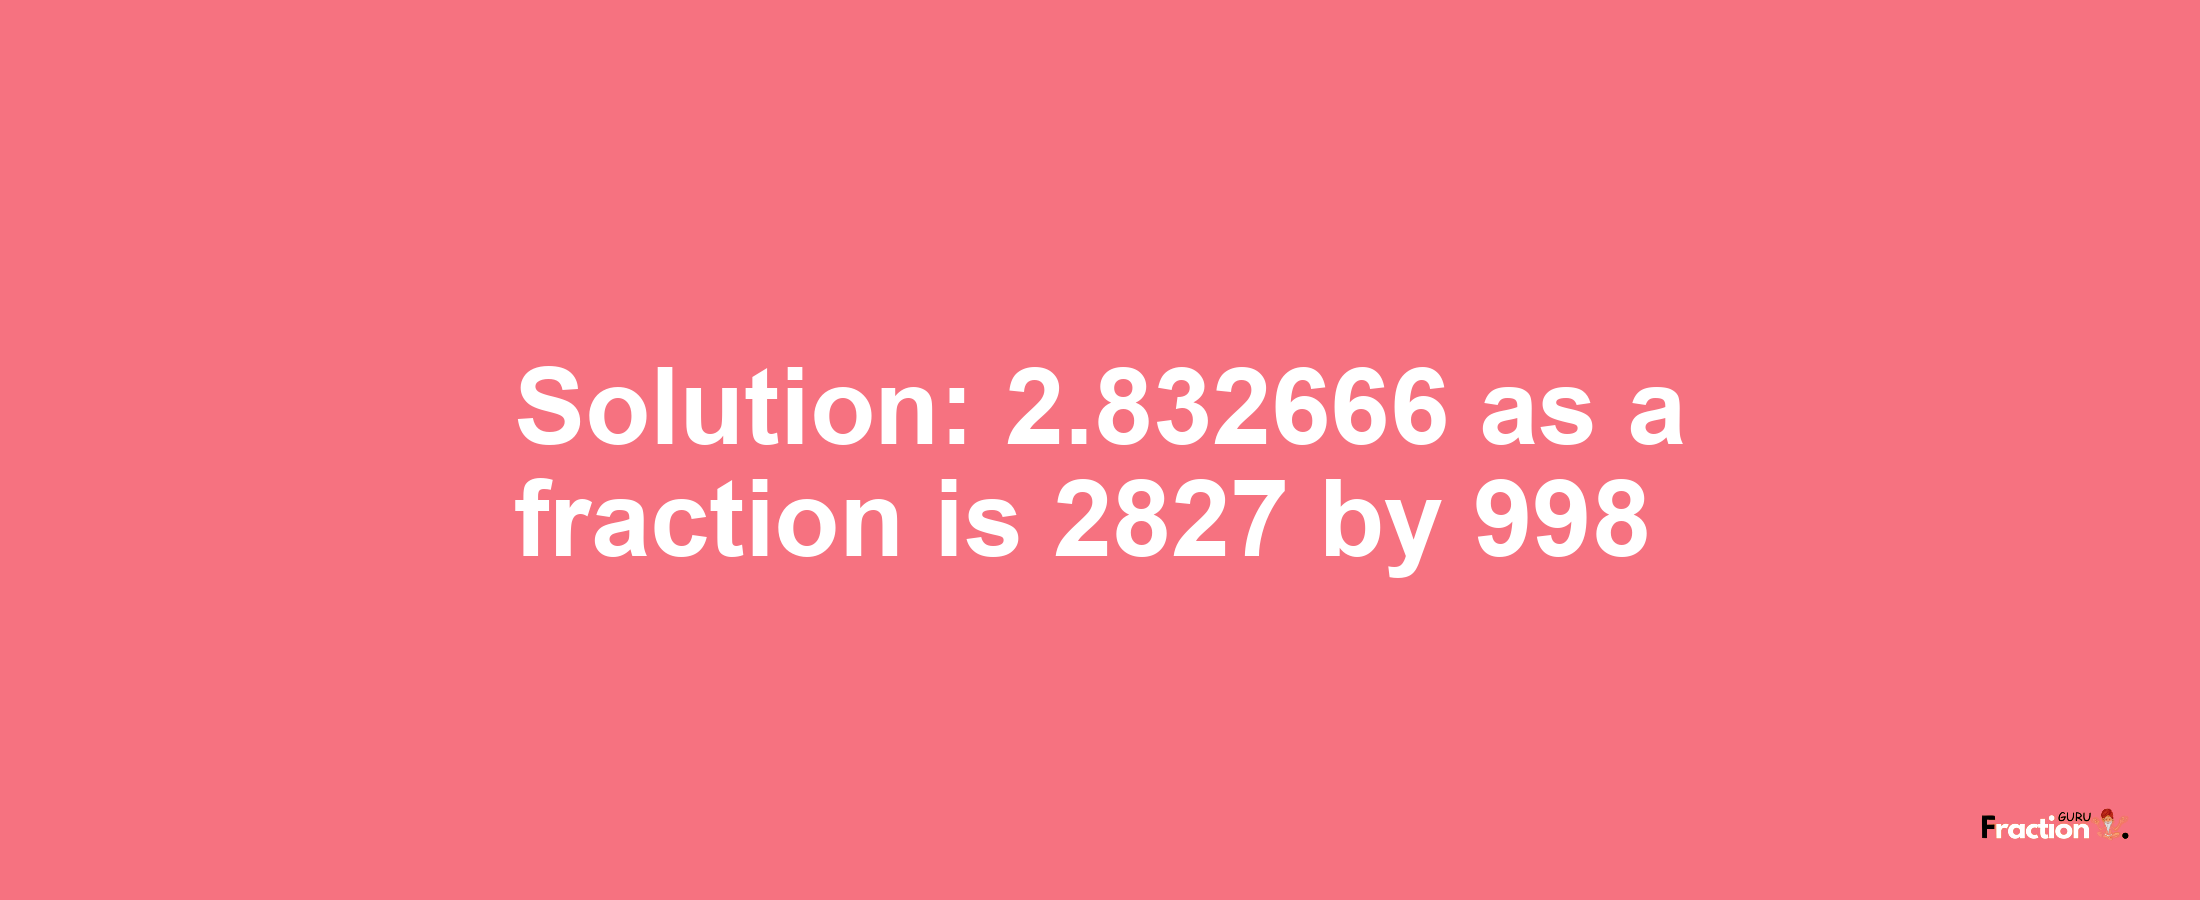 Solution:2.832666 as a fraction is 2827/998